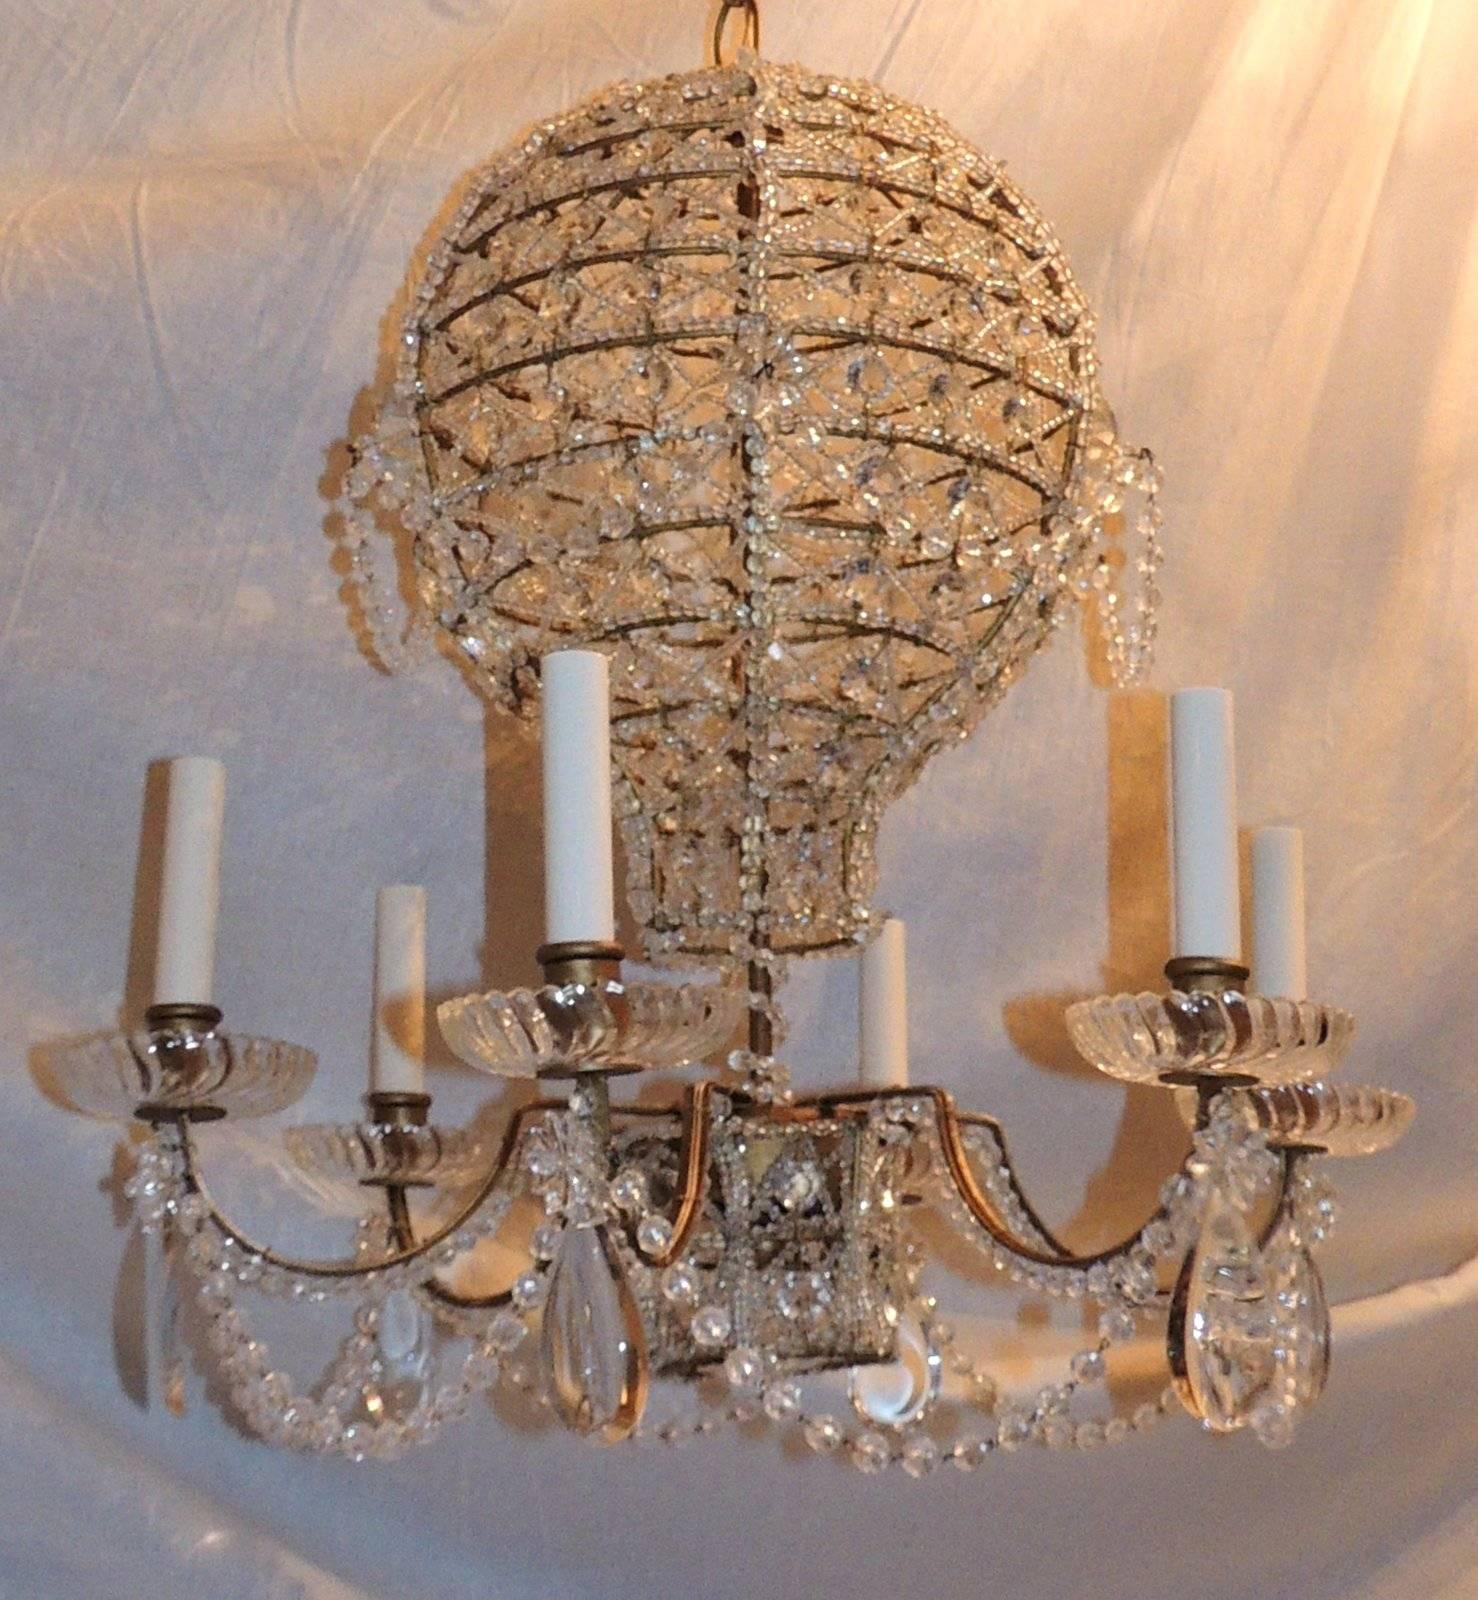 A wonderful pair cut-crystal hot air balloon complete with crystal basket has six arms
each with crystal drops and swirl crystal bobeches. The patina gold gilt soft aged distress that adds to the charm of this lovely chandelier adorned with beaded